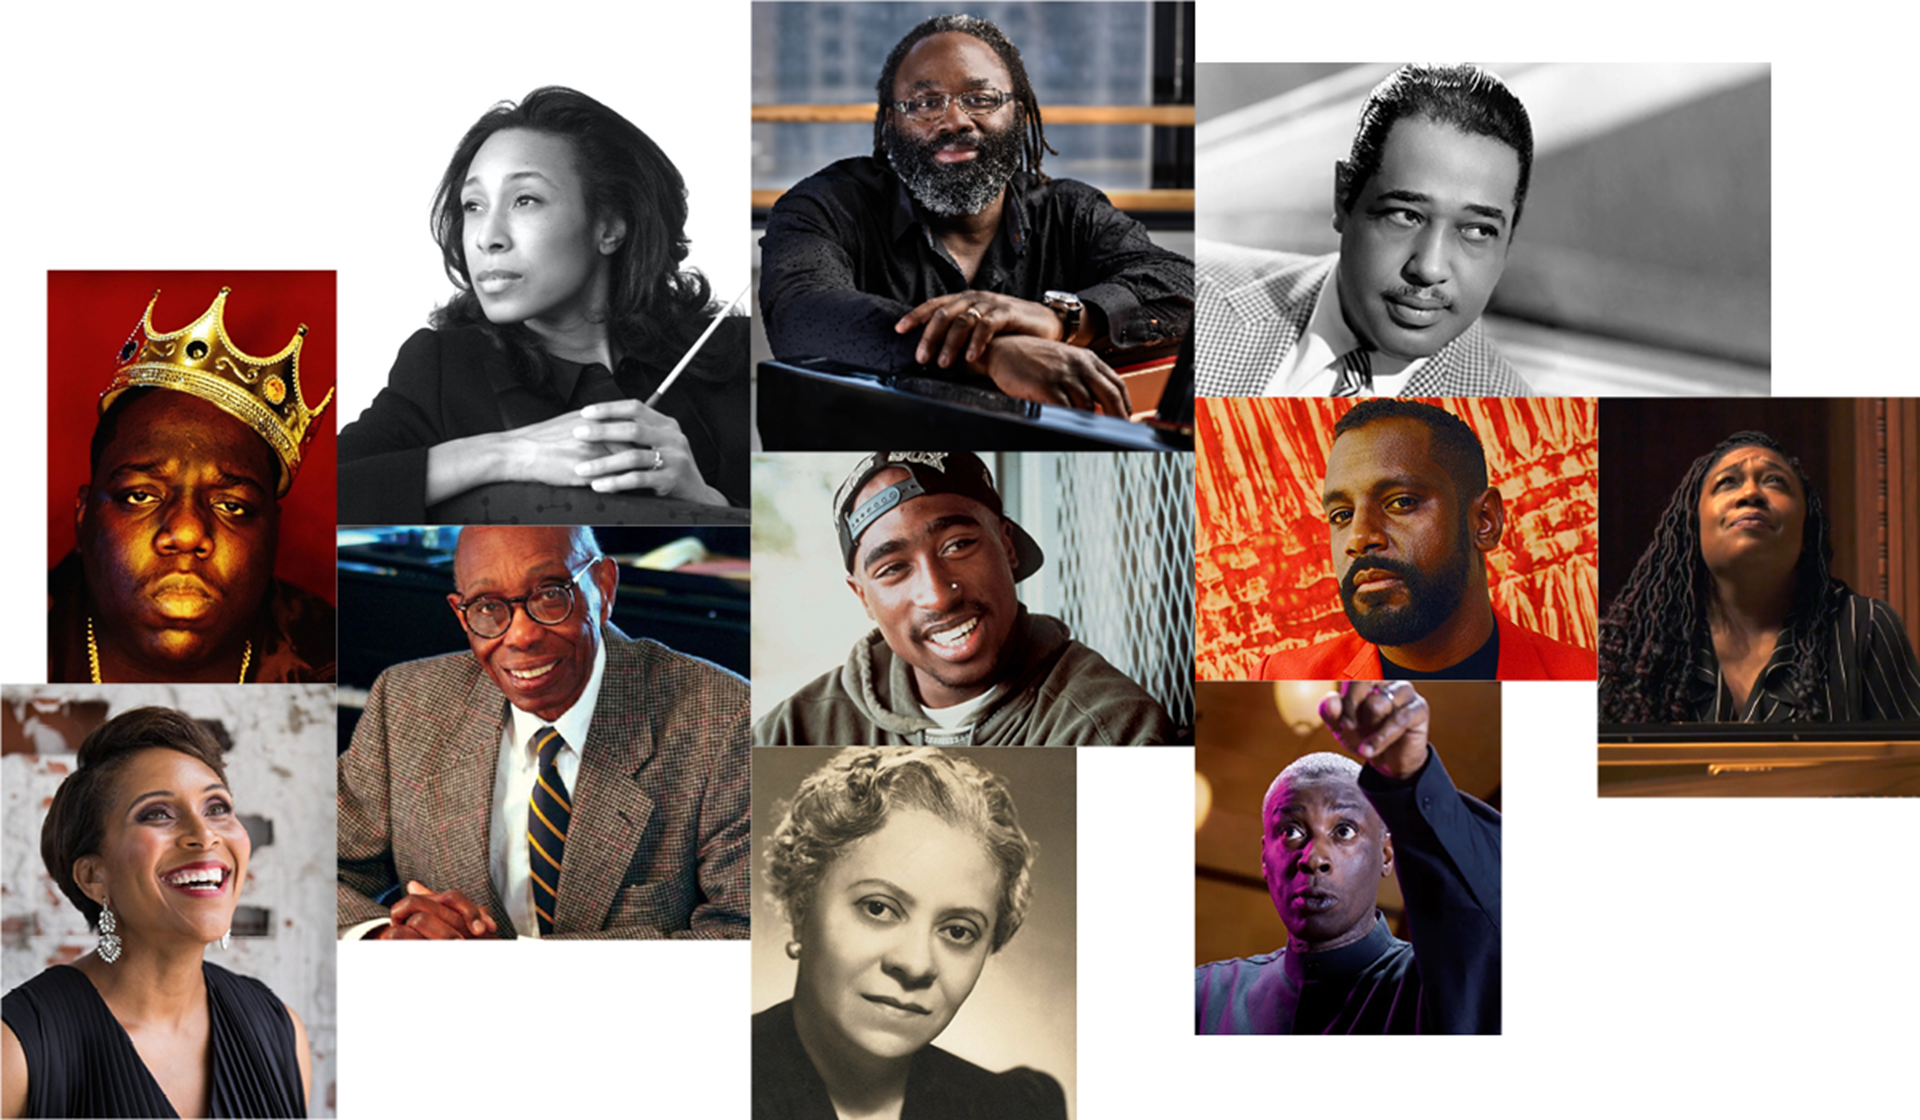 Composite image of some of the Black artists coming to Strathmore this season